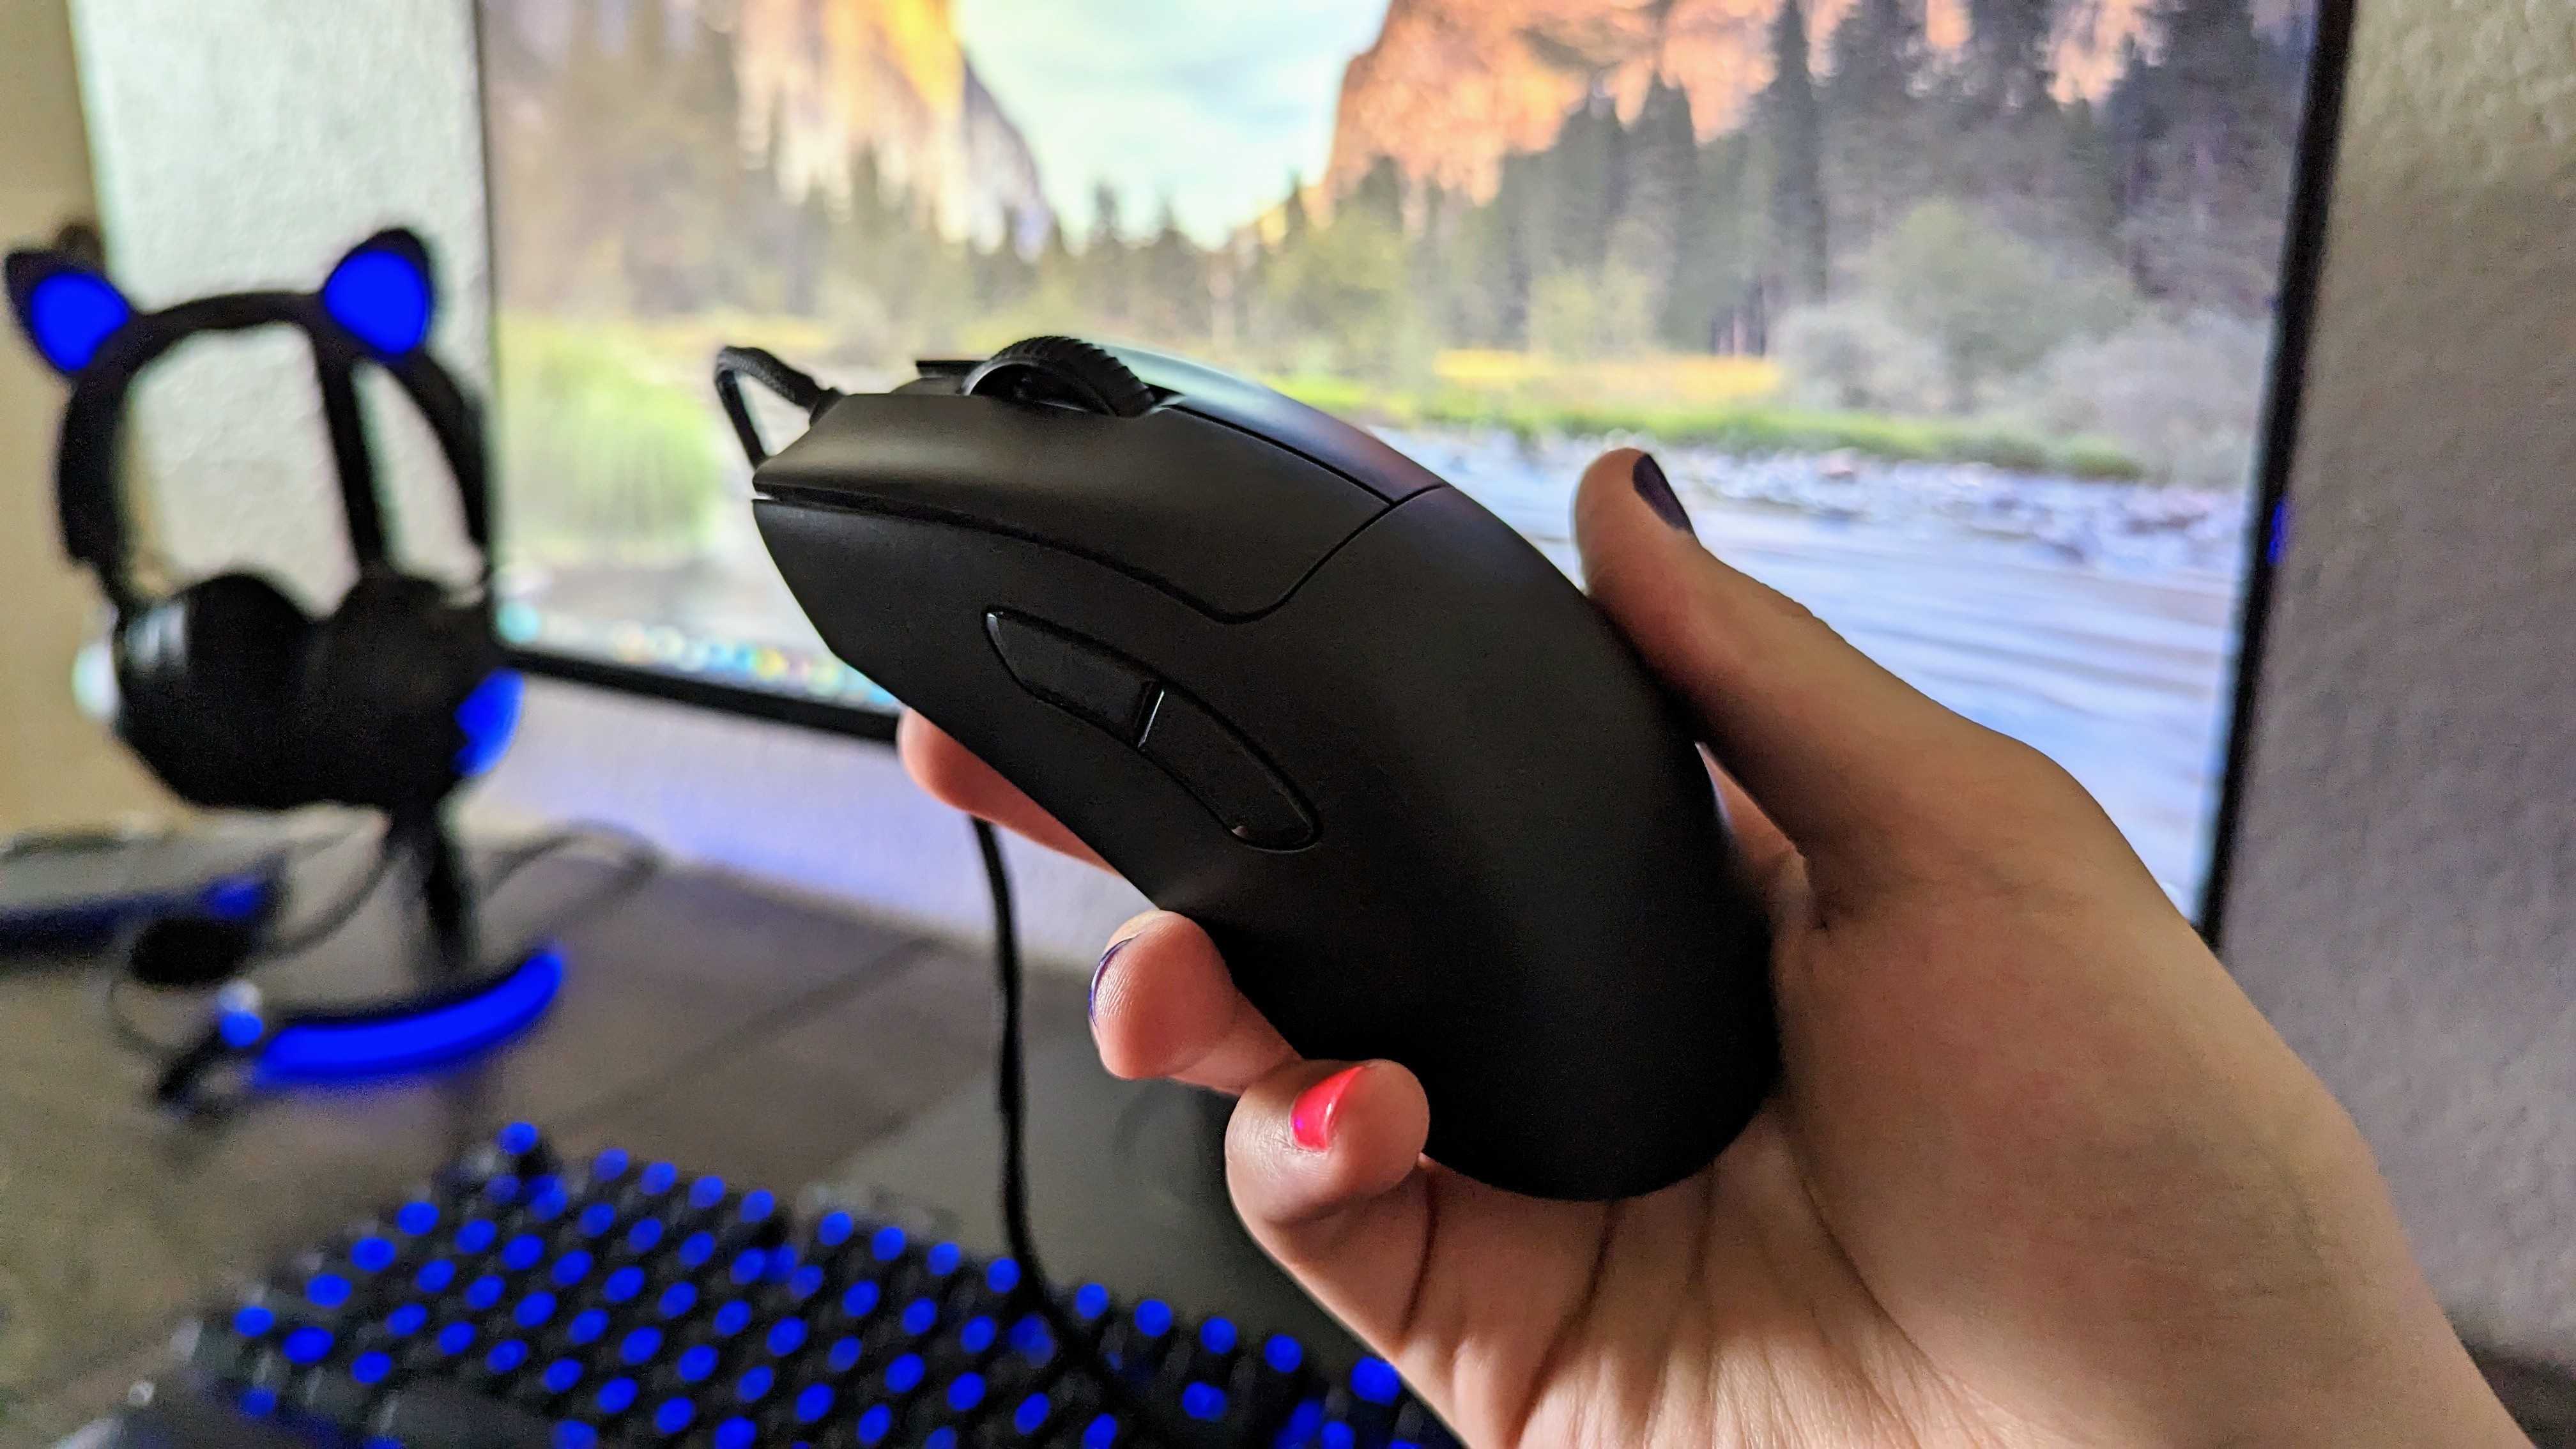 Razer DeathAdder V3 mouse review: Gaming mice don't get much